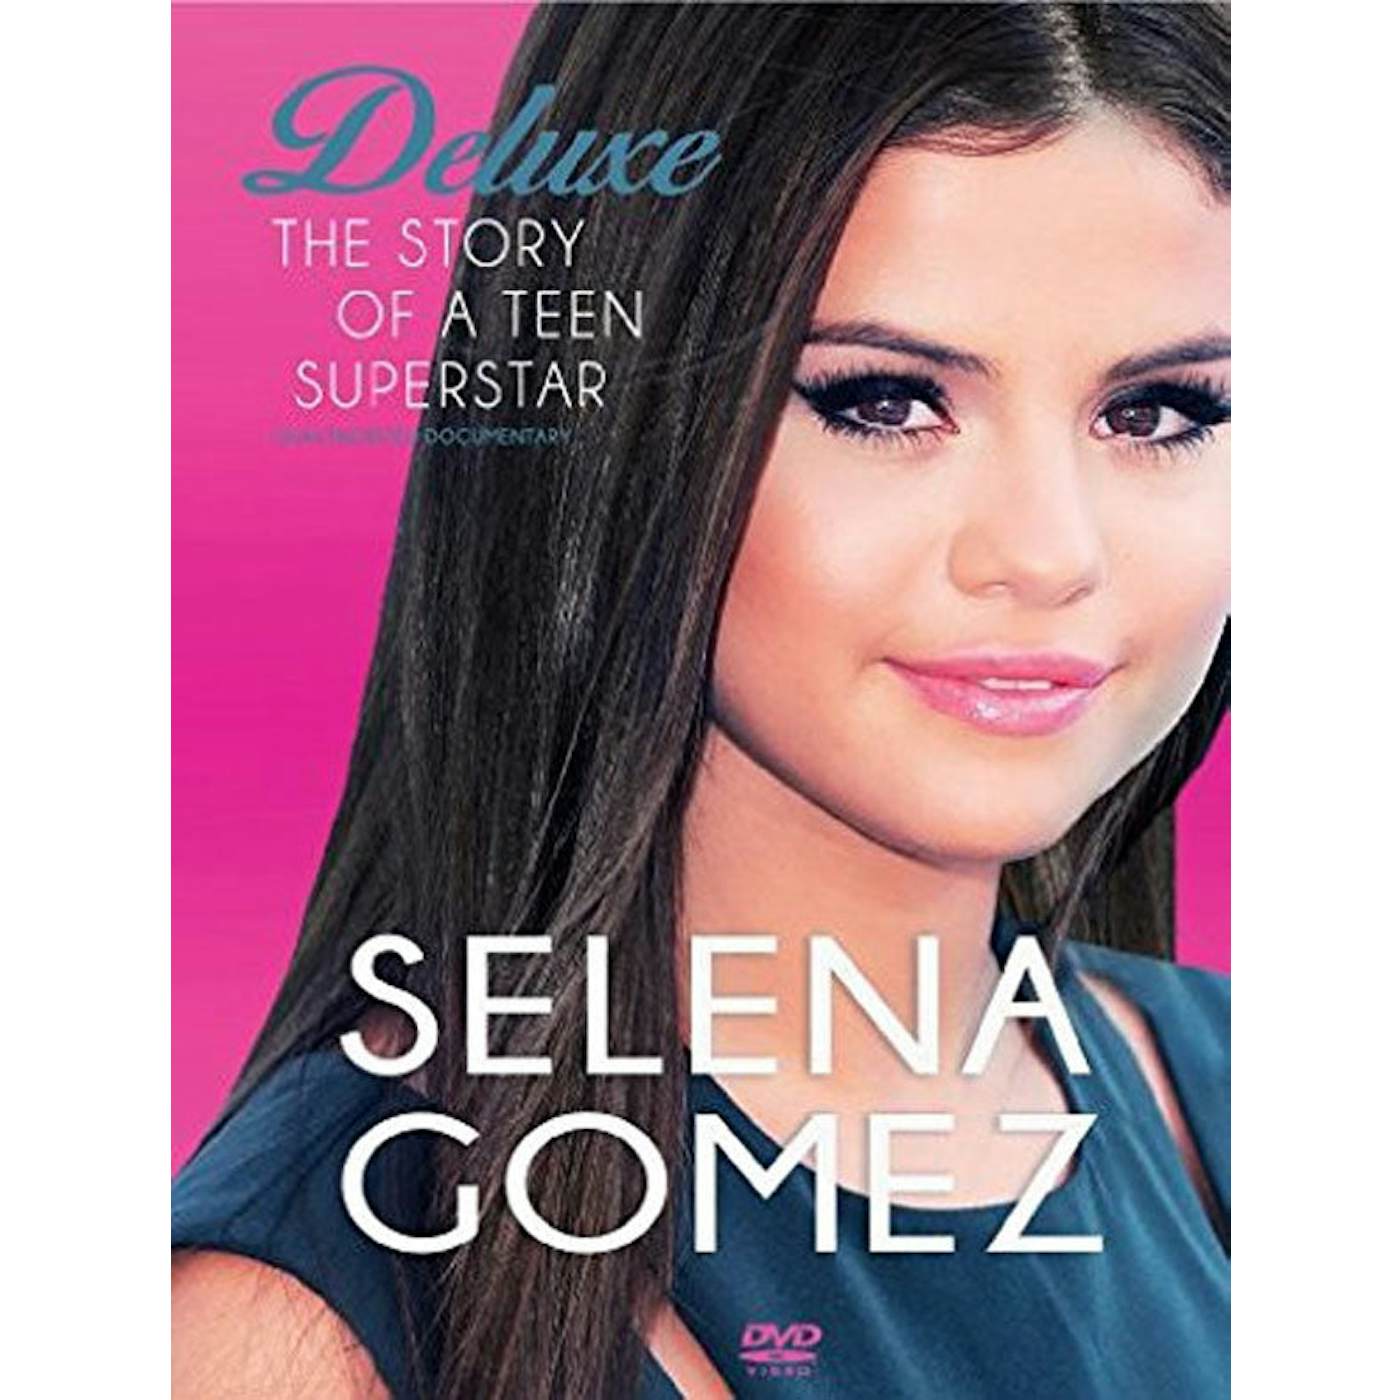 Selena Gomez DVD - The Story Of A Teenage Superstar